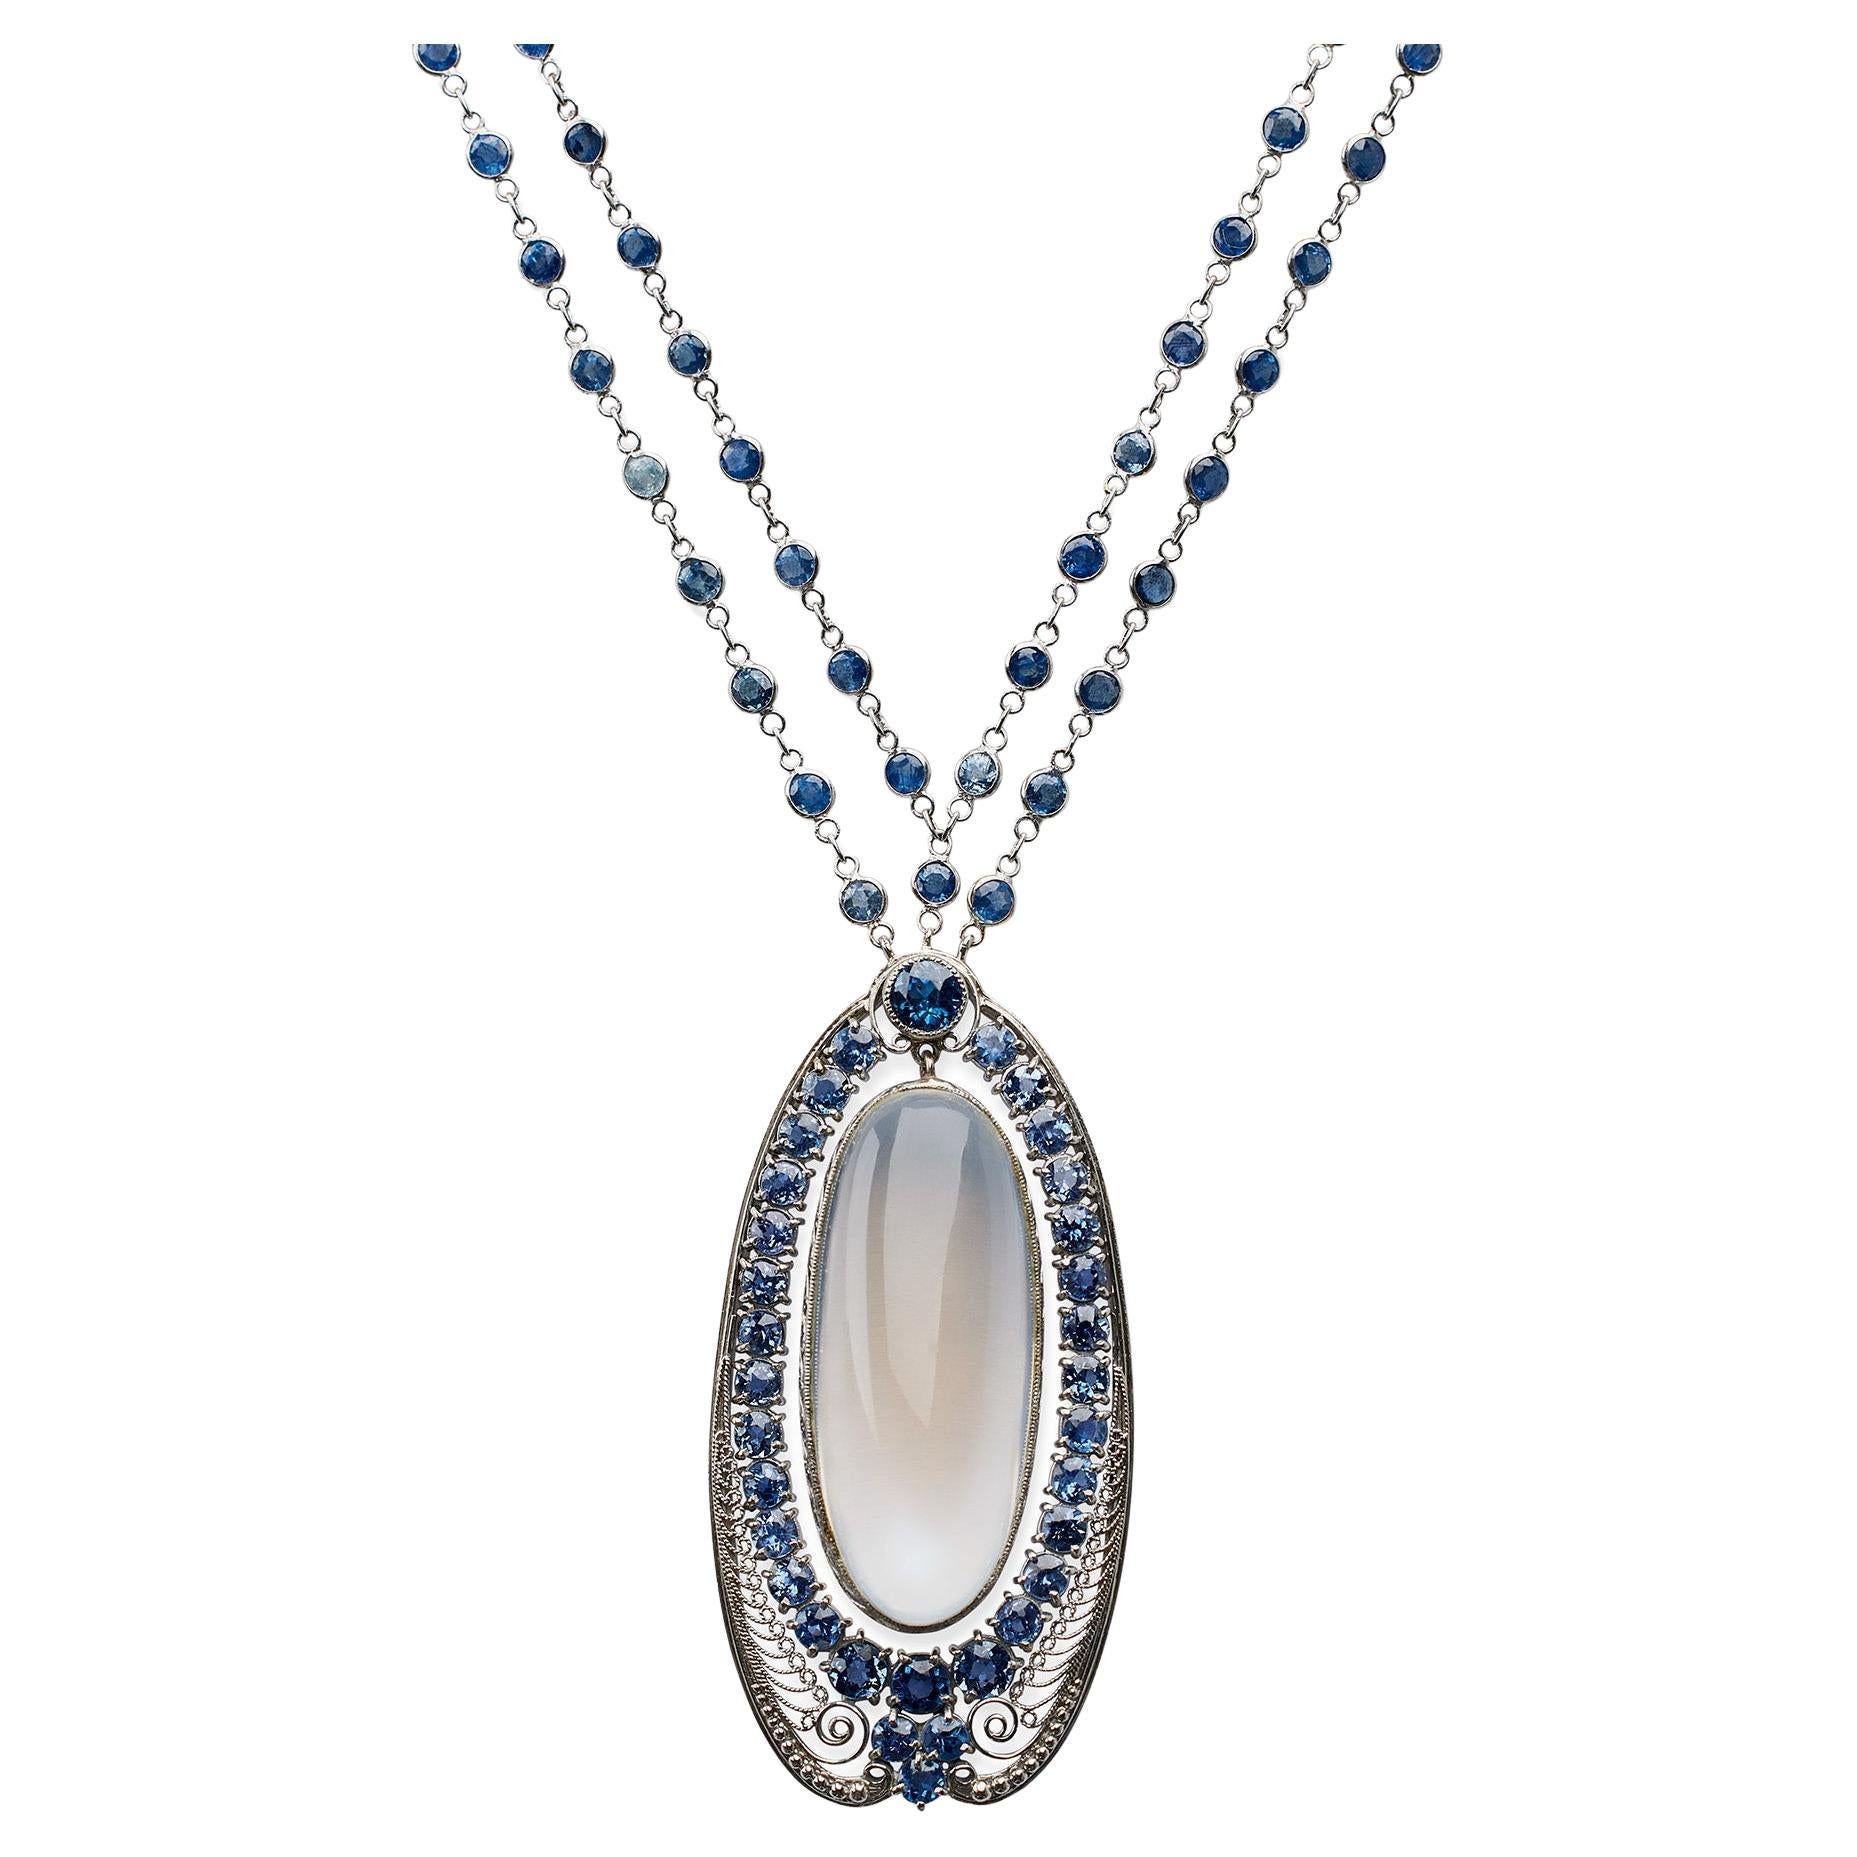 Louis Comfort Tiffany Moonstone and Sapphire Pendant Necklace, Tiffany & Co.